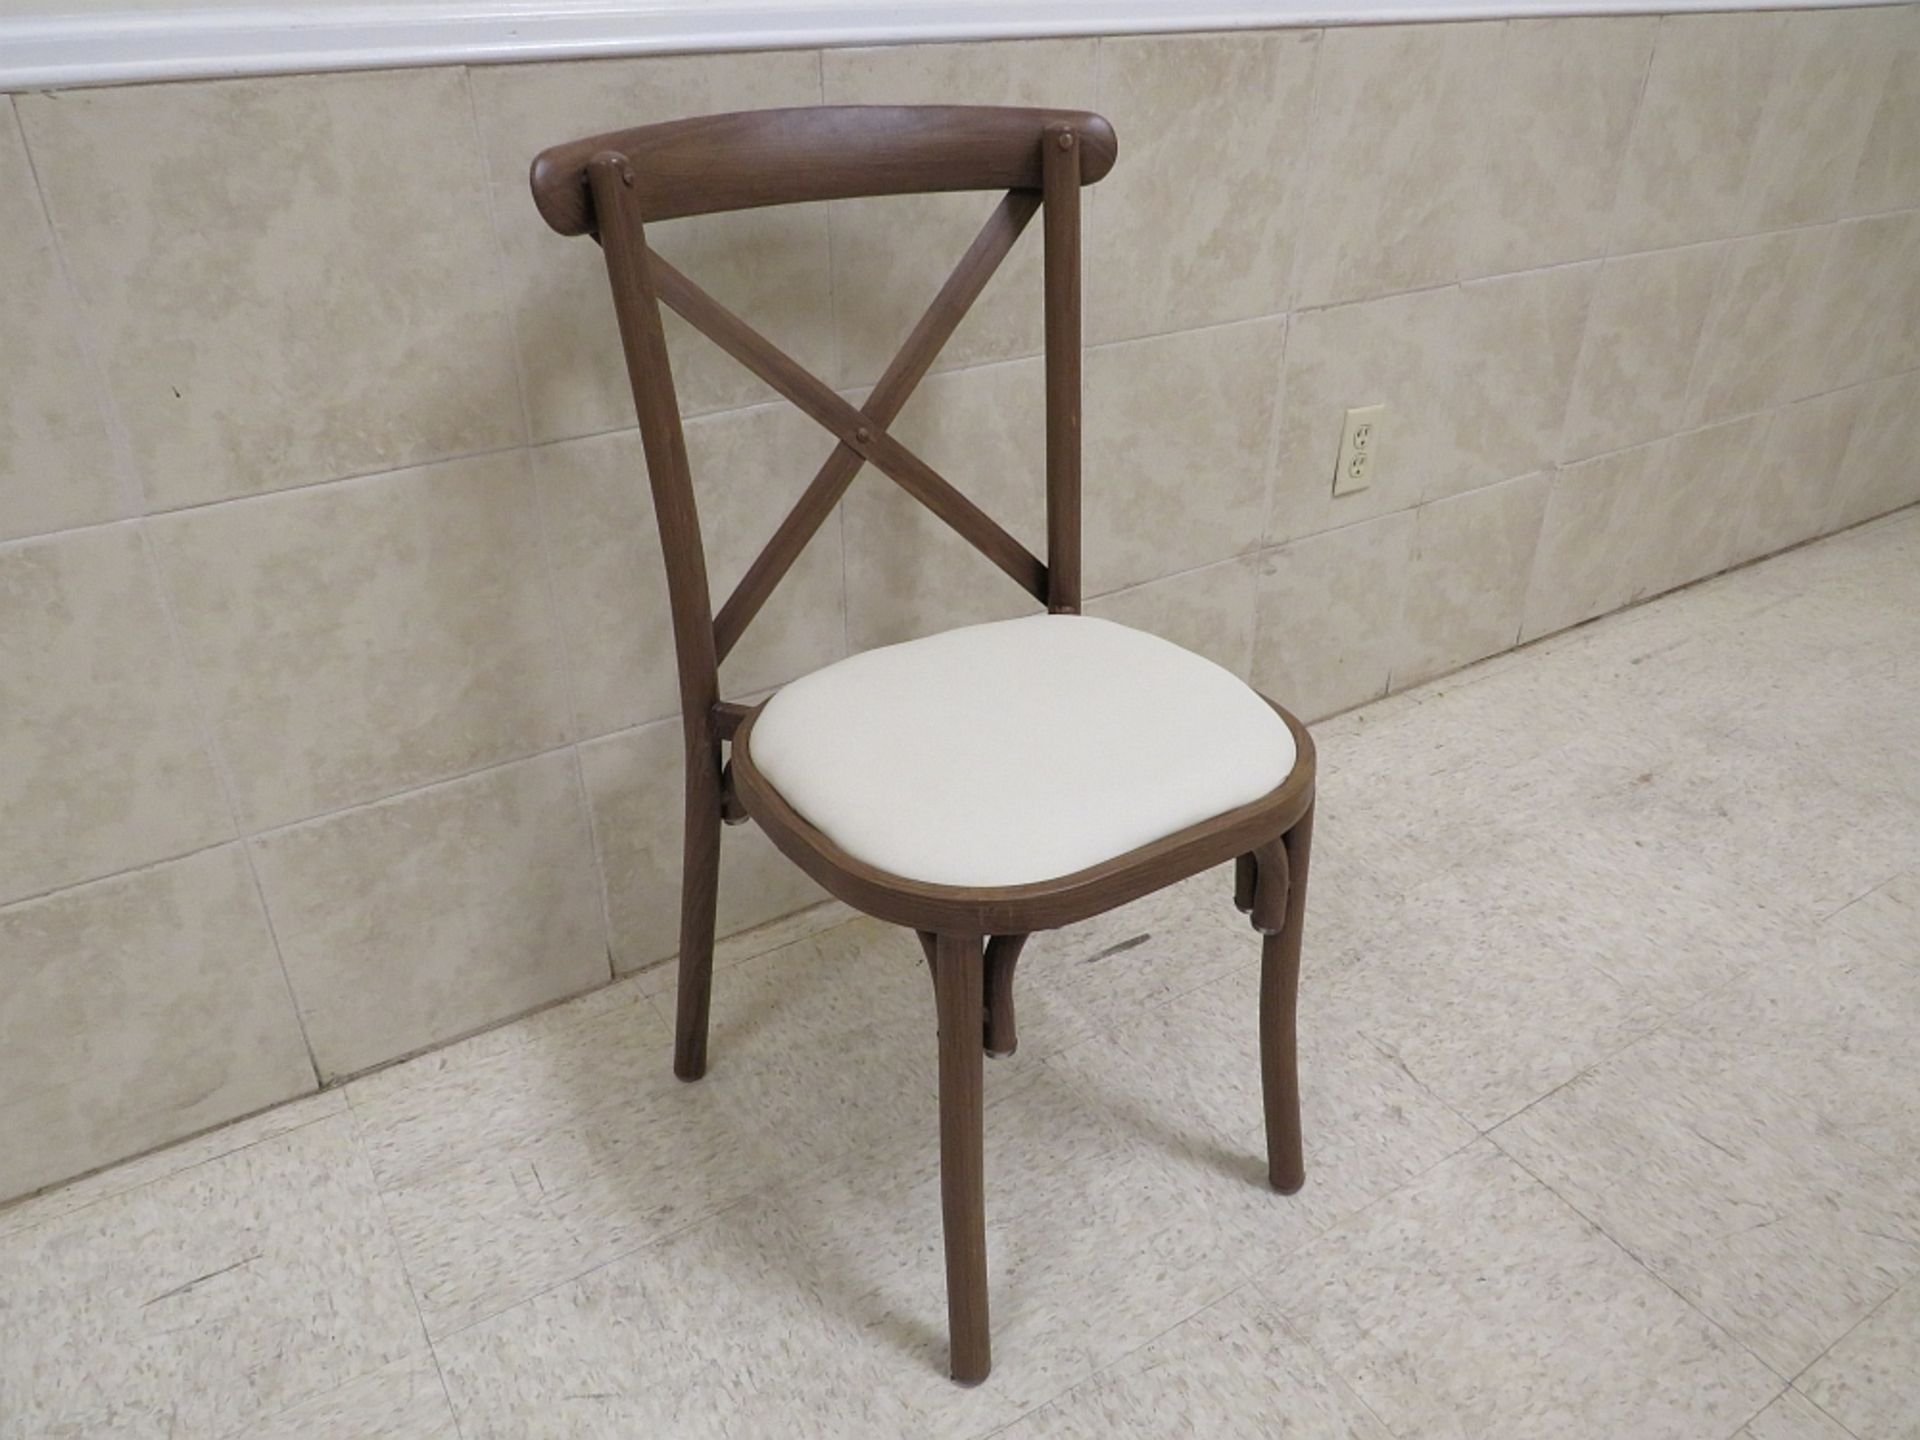 Chair - Crossback - Tan Pad - Nonfolding